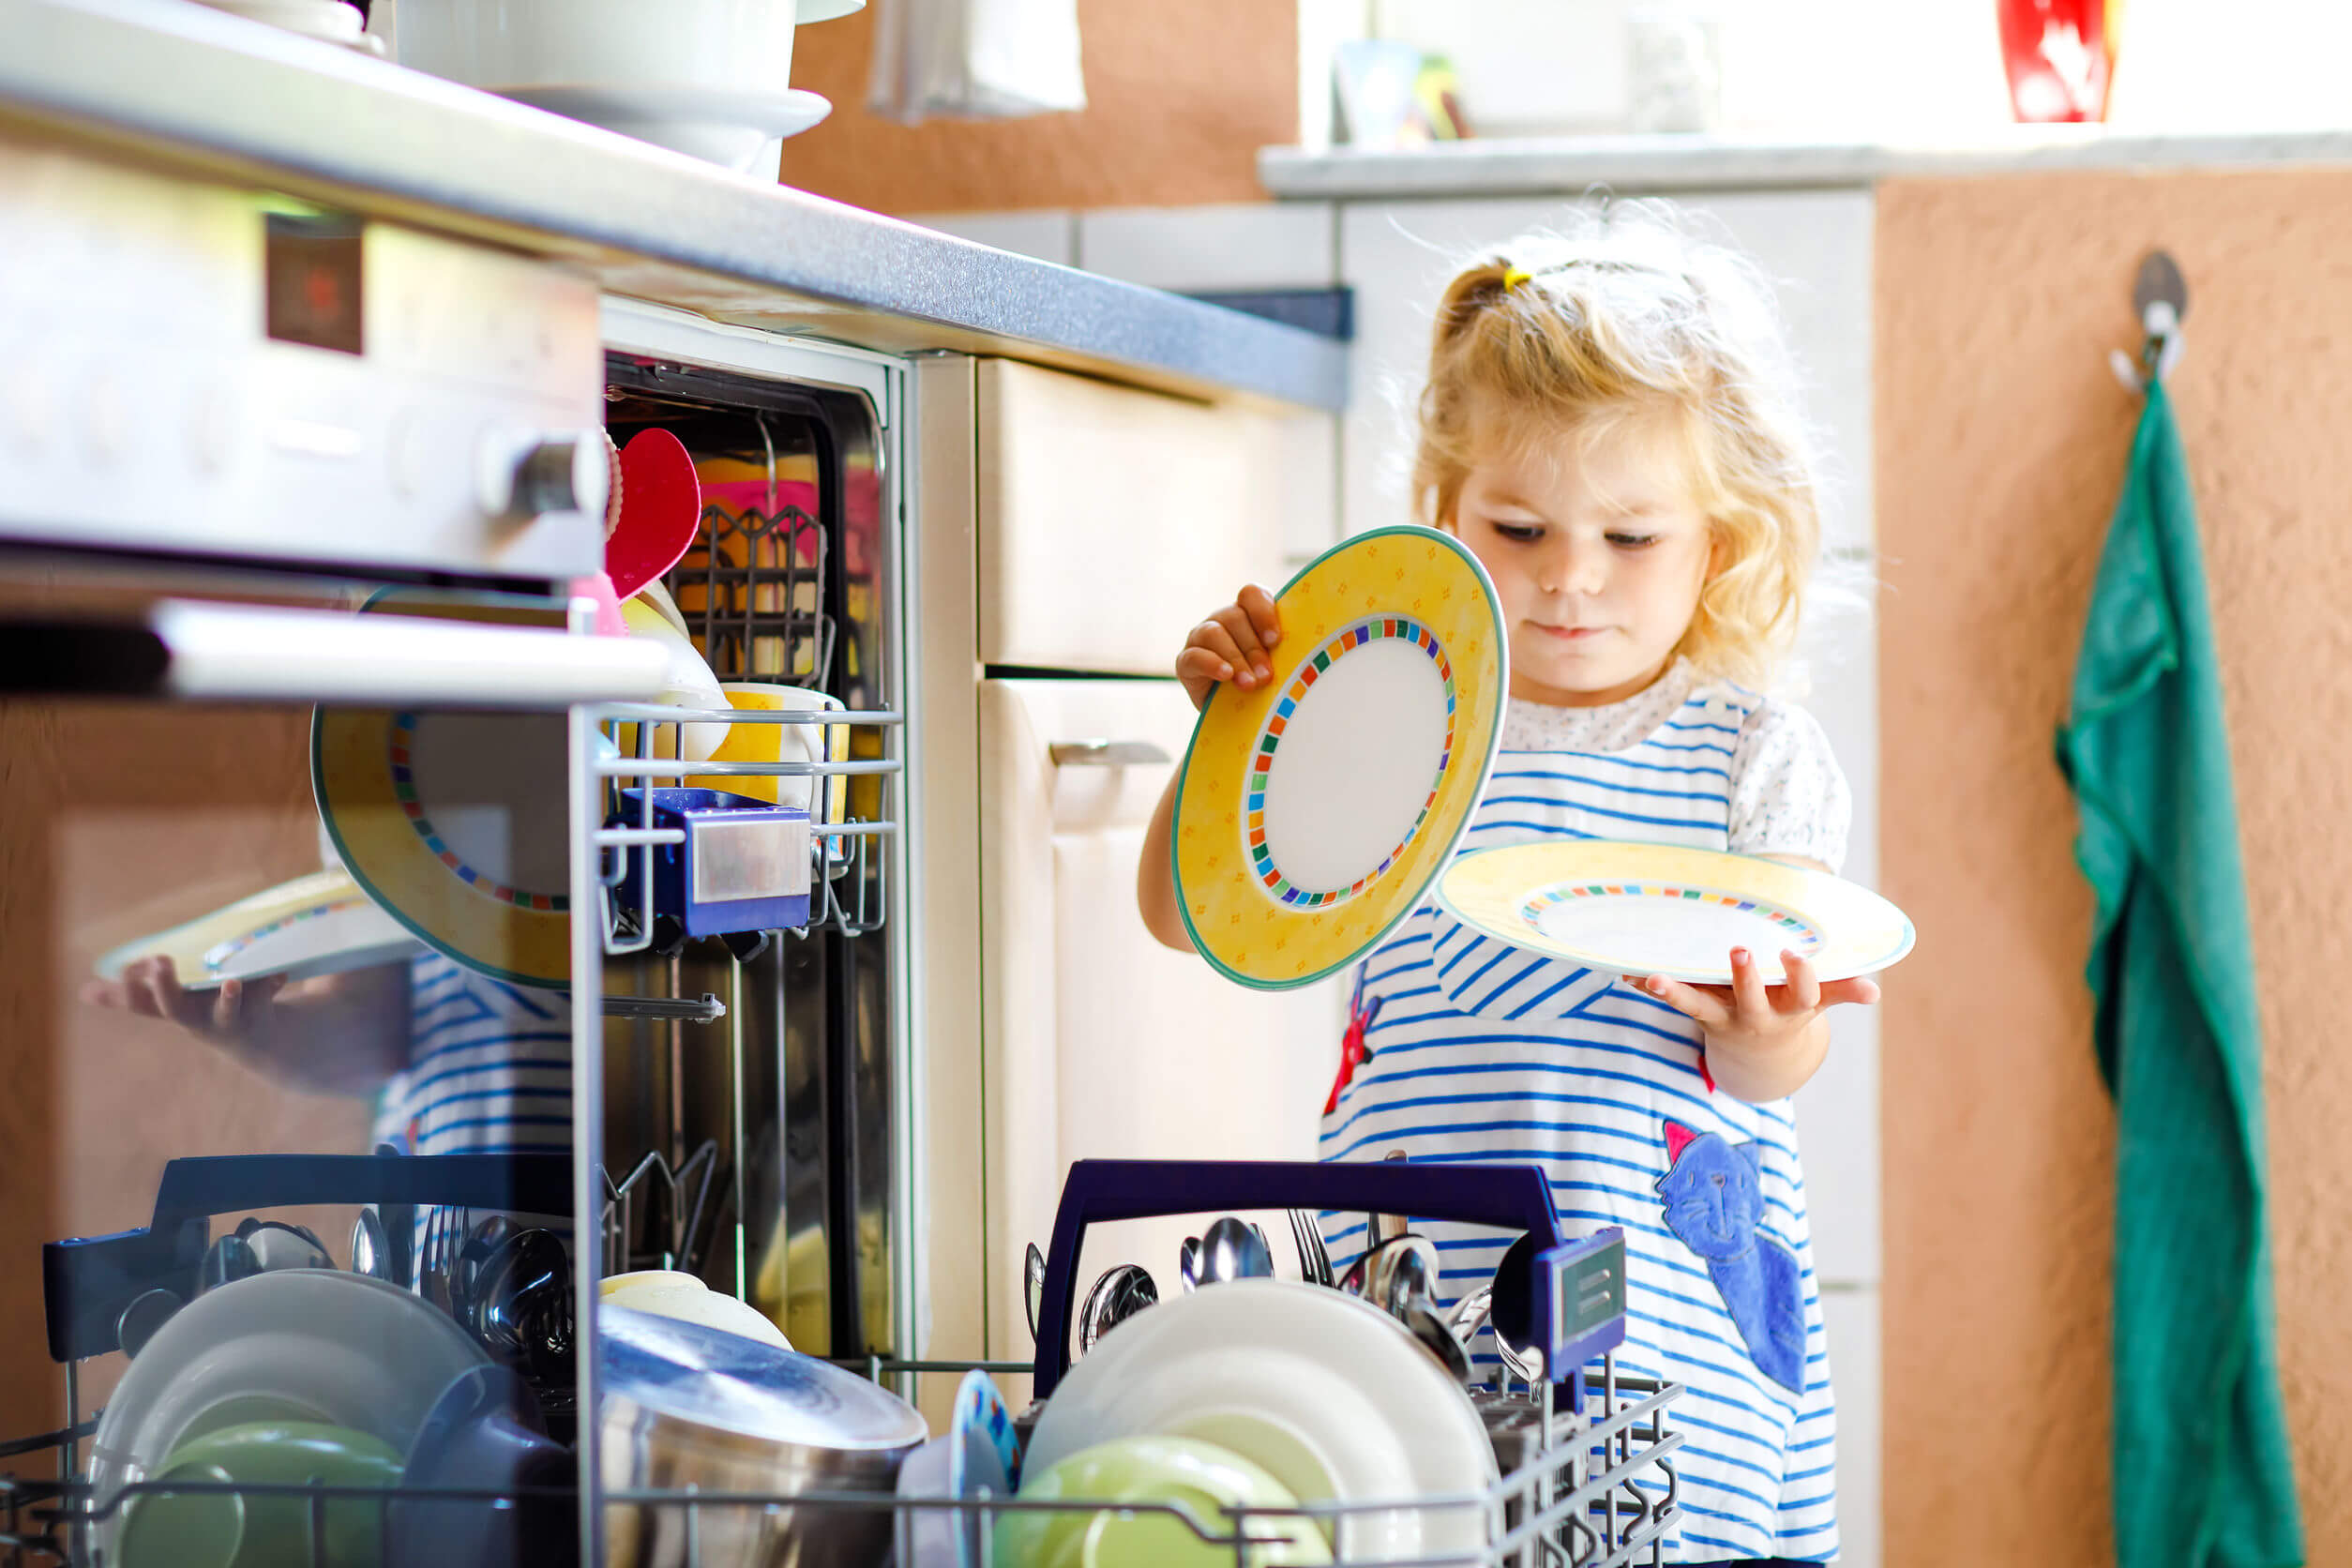 A toddler helping to unload the dishwasher.